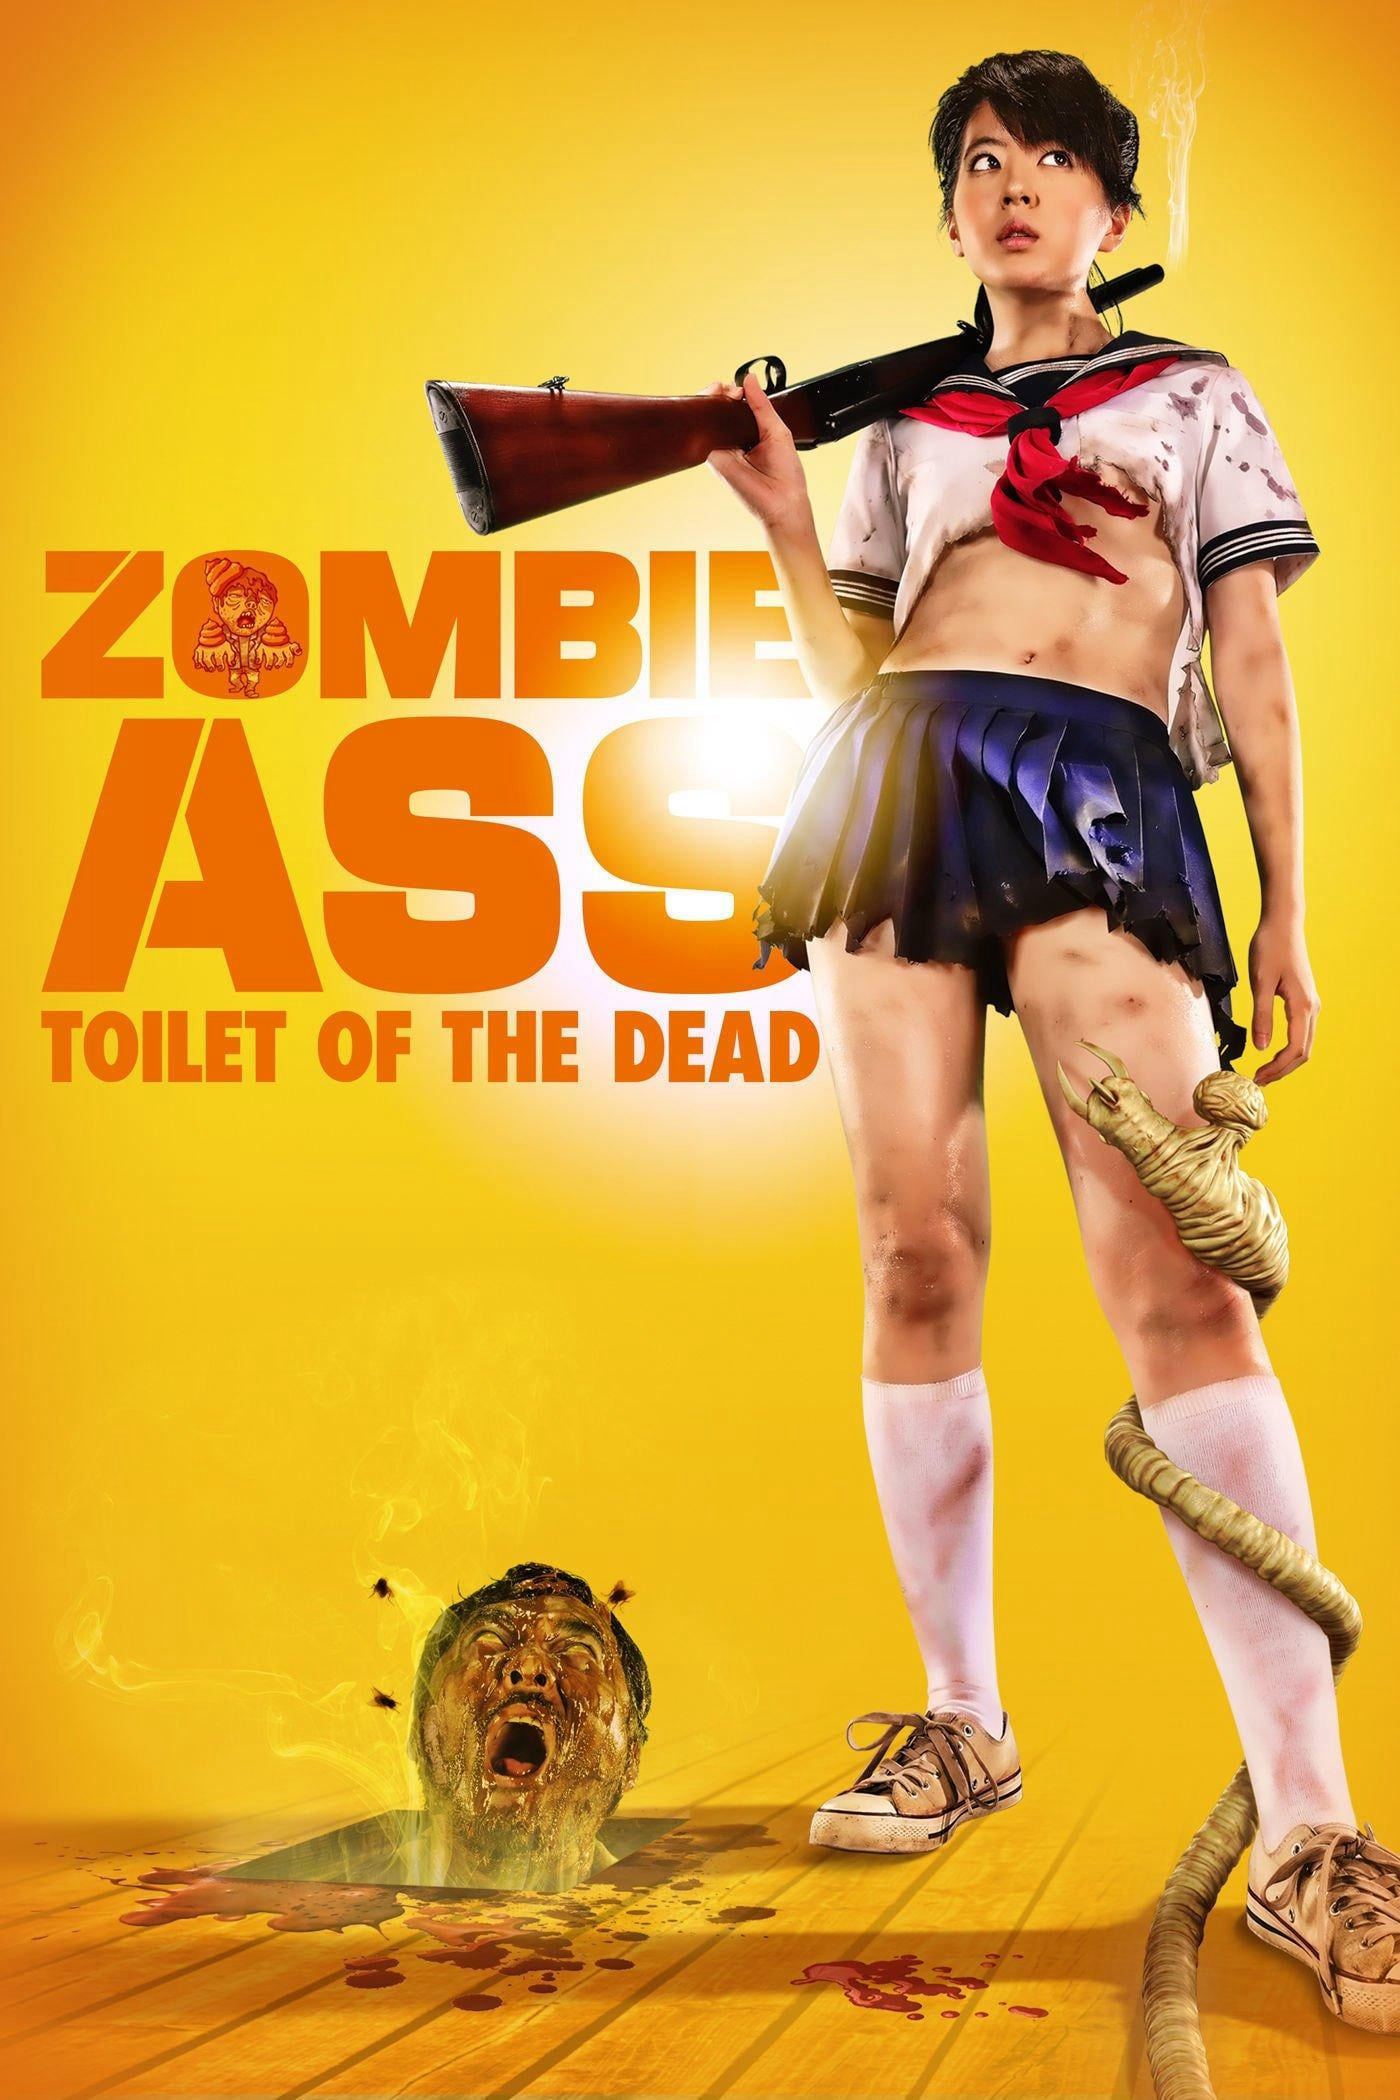 Poster Phim Toilet Tử Thần (Zombie Ass: Toilet of the Dead)